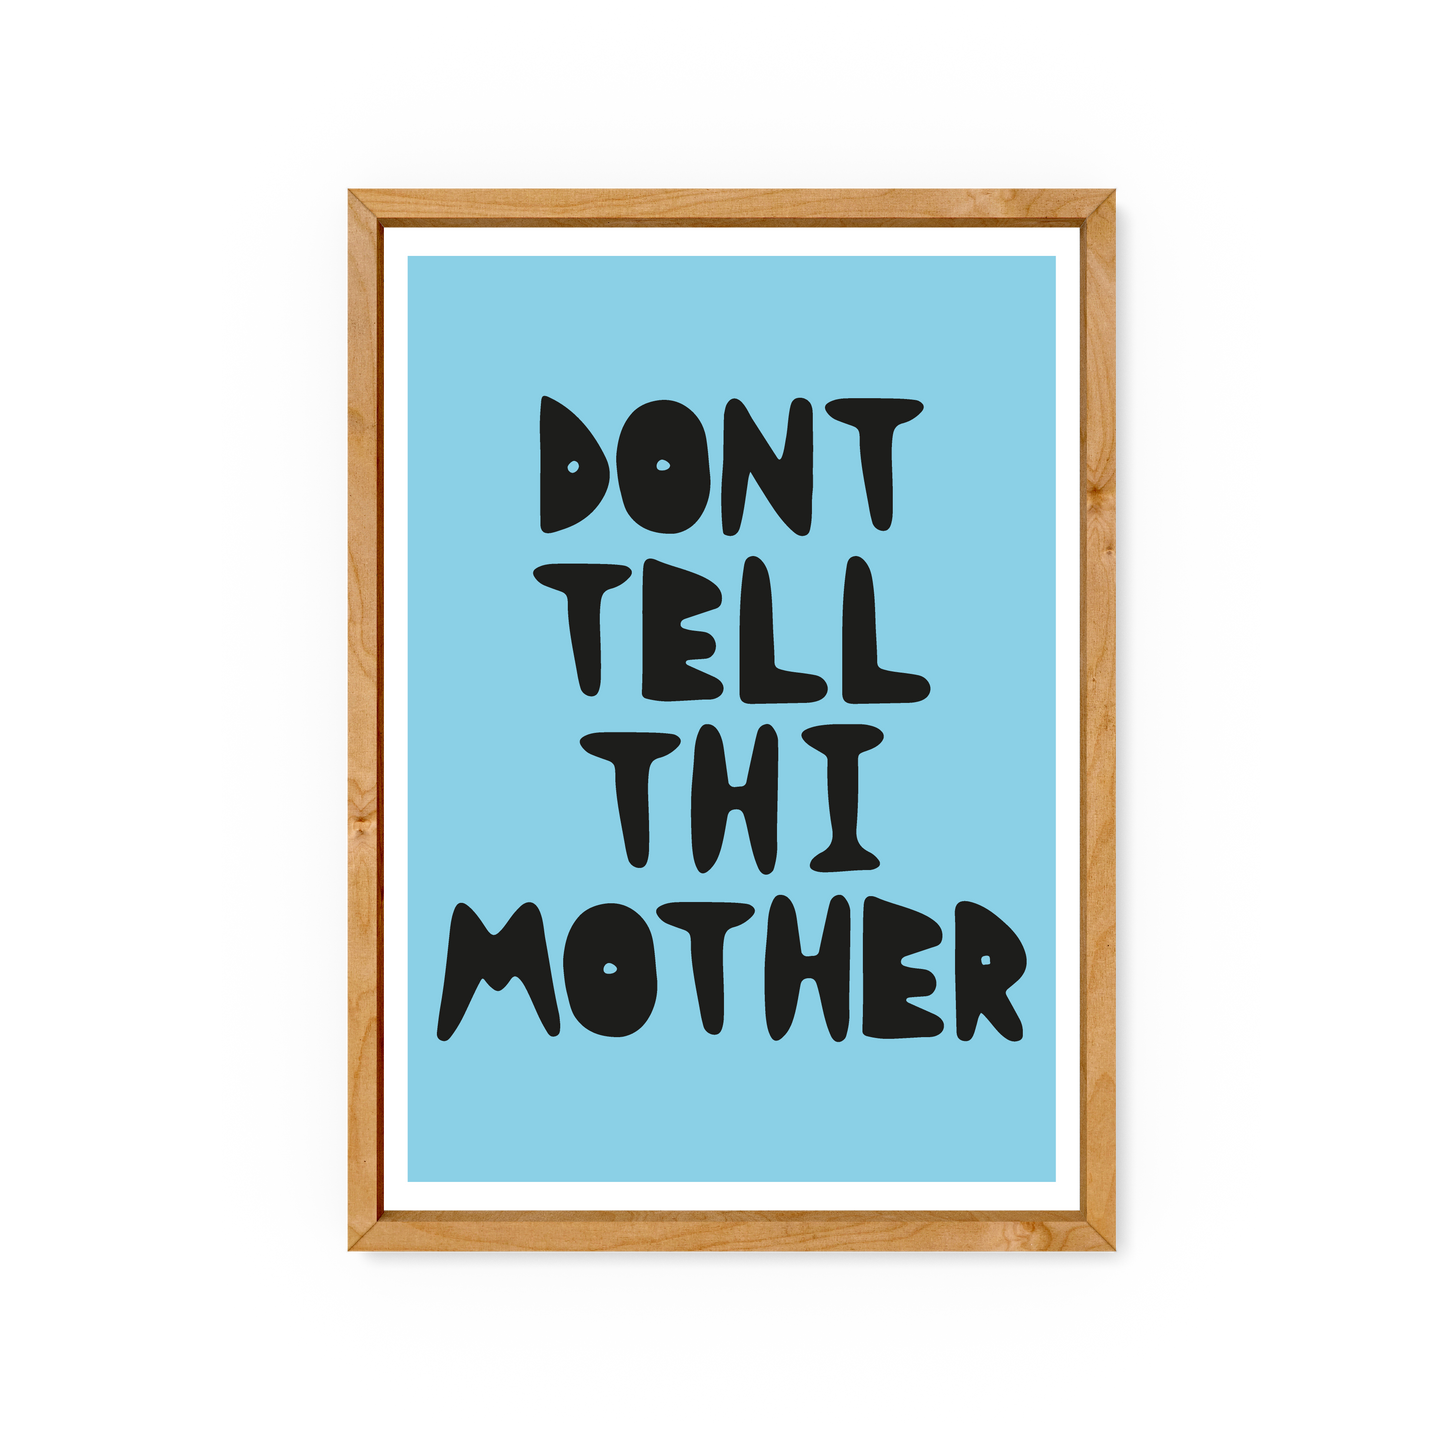 Don't Tell Thi Mother - Limited Edition Screen Print (30) - Luke Horton